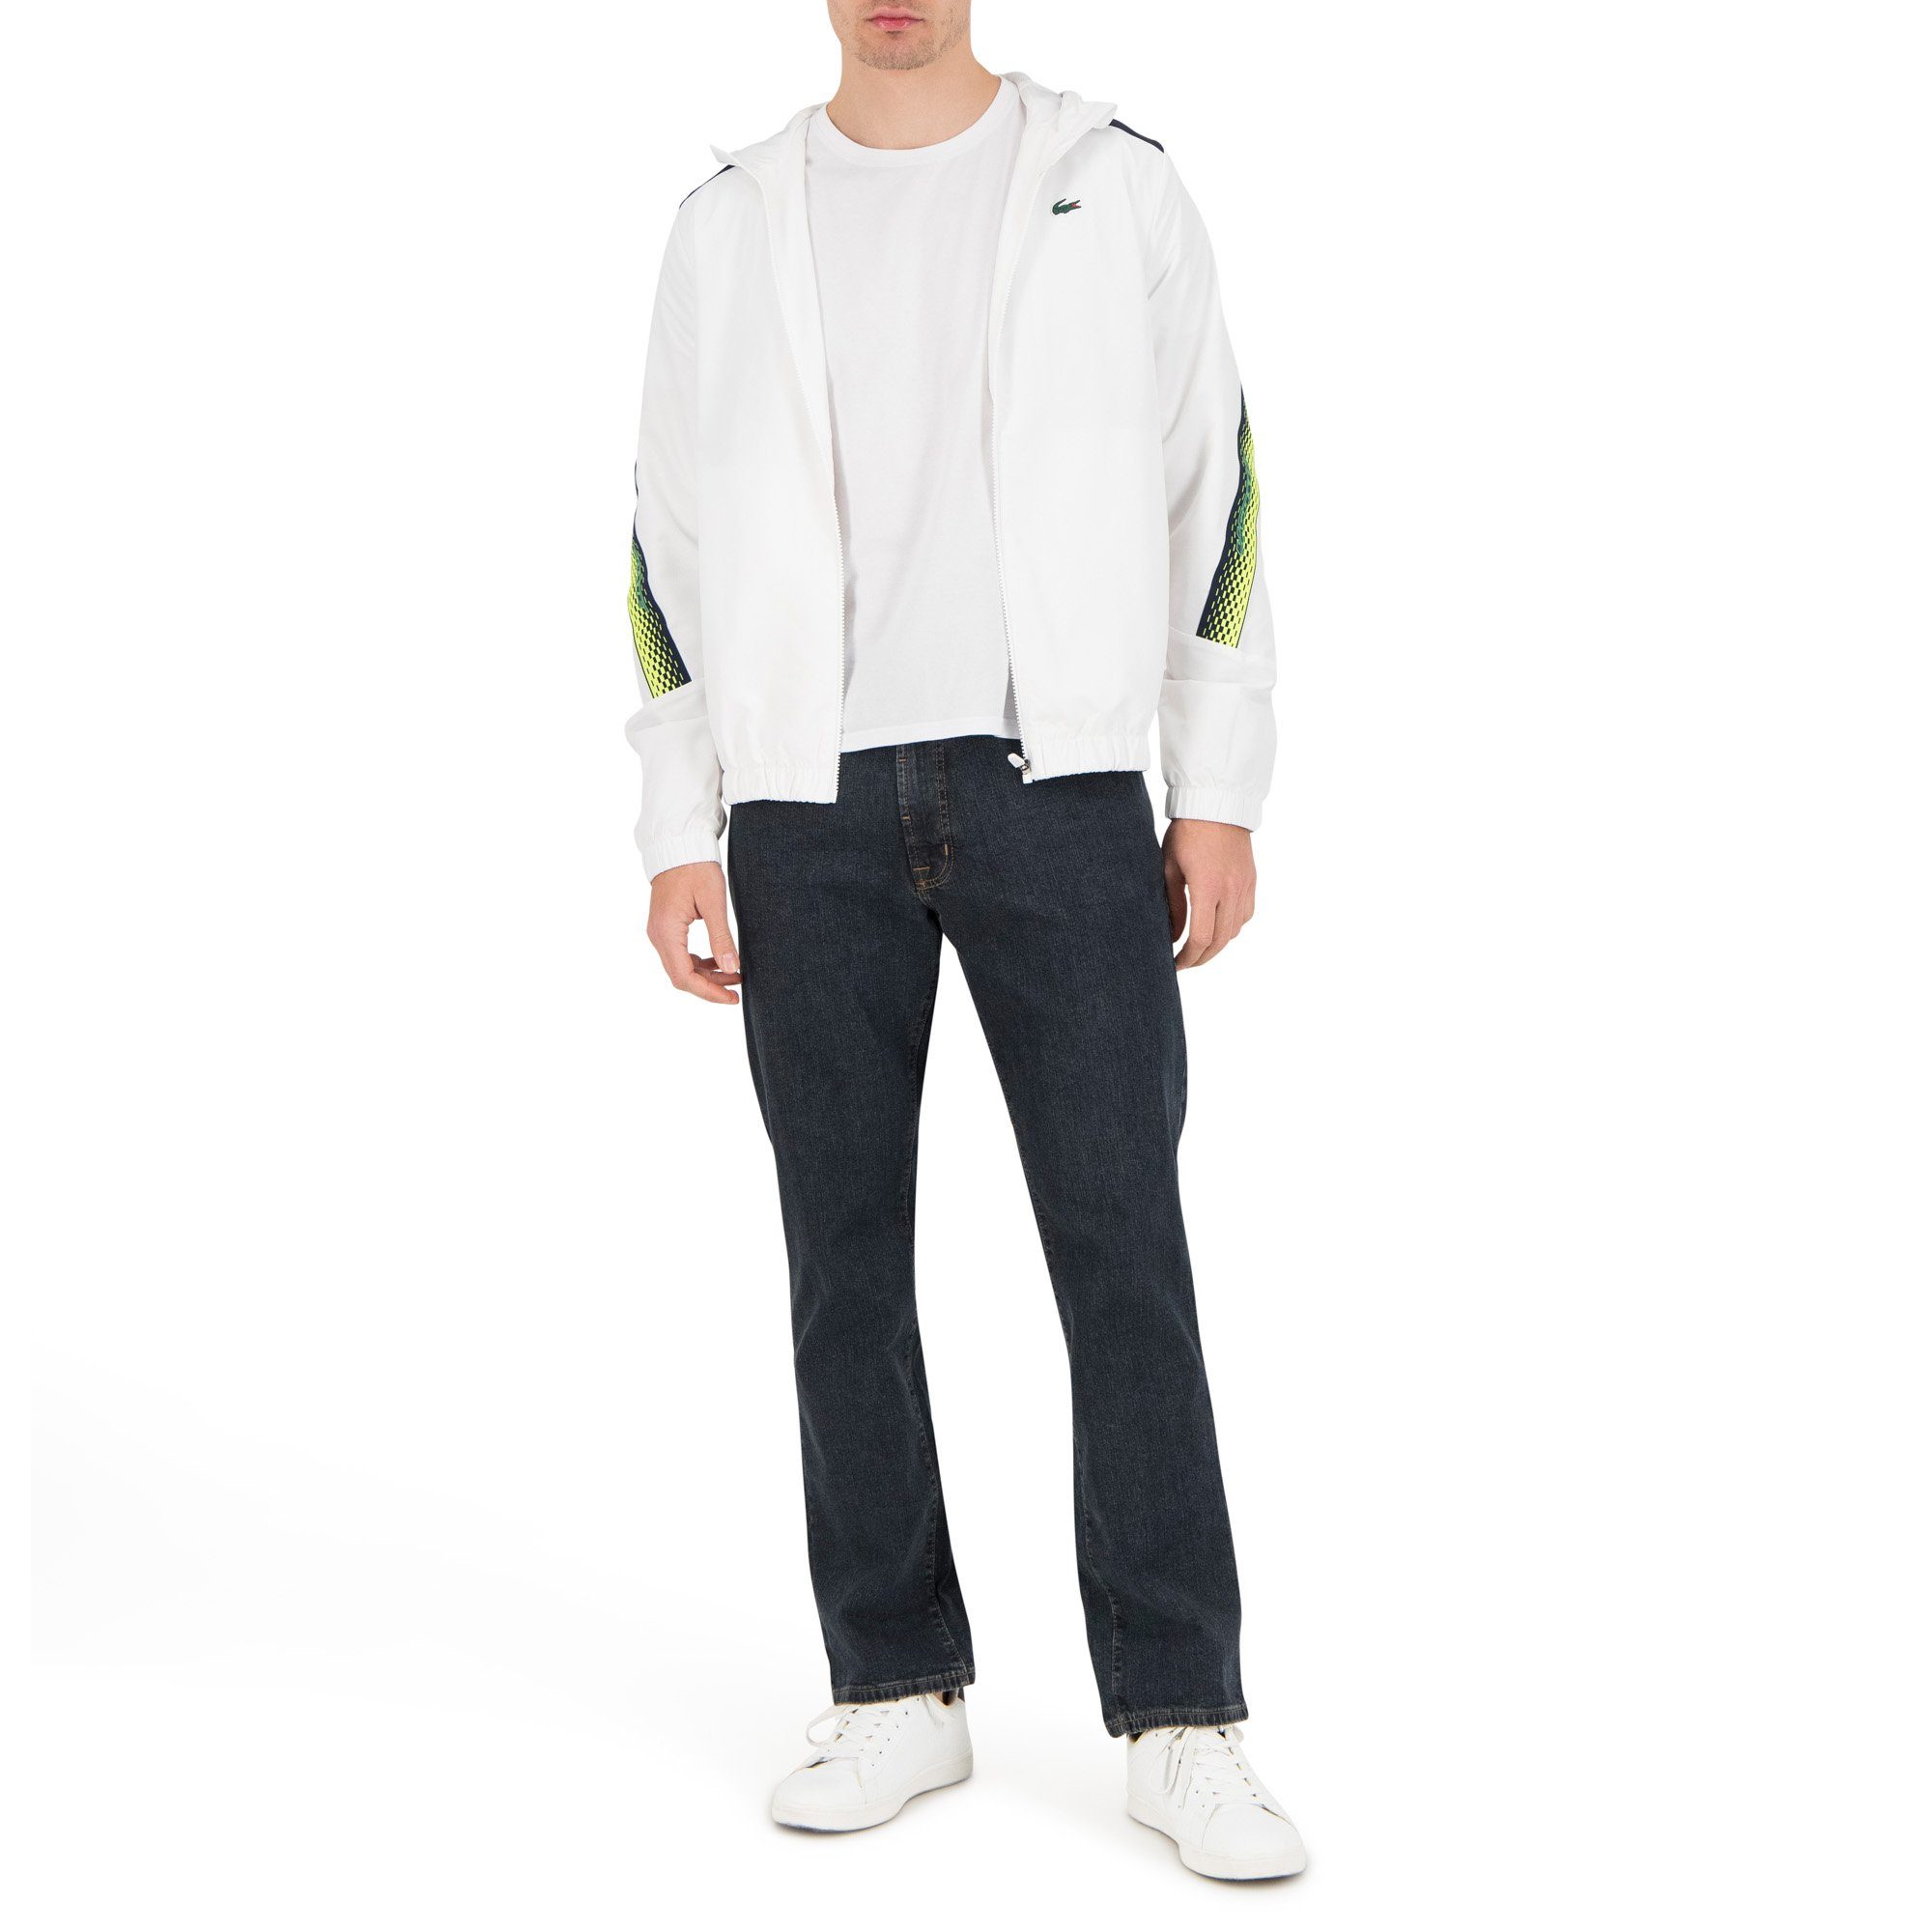 Lacoste Funktionsjacke WHITE/NAVY BLUE-ELECTRIC (X1I) YELLOW